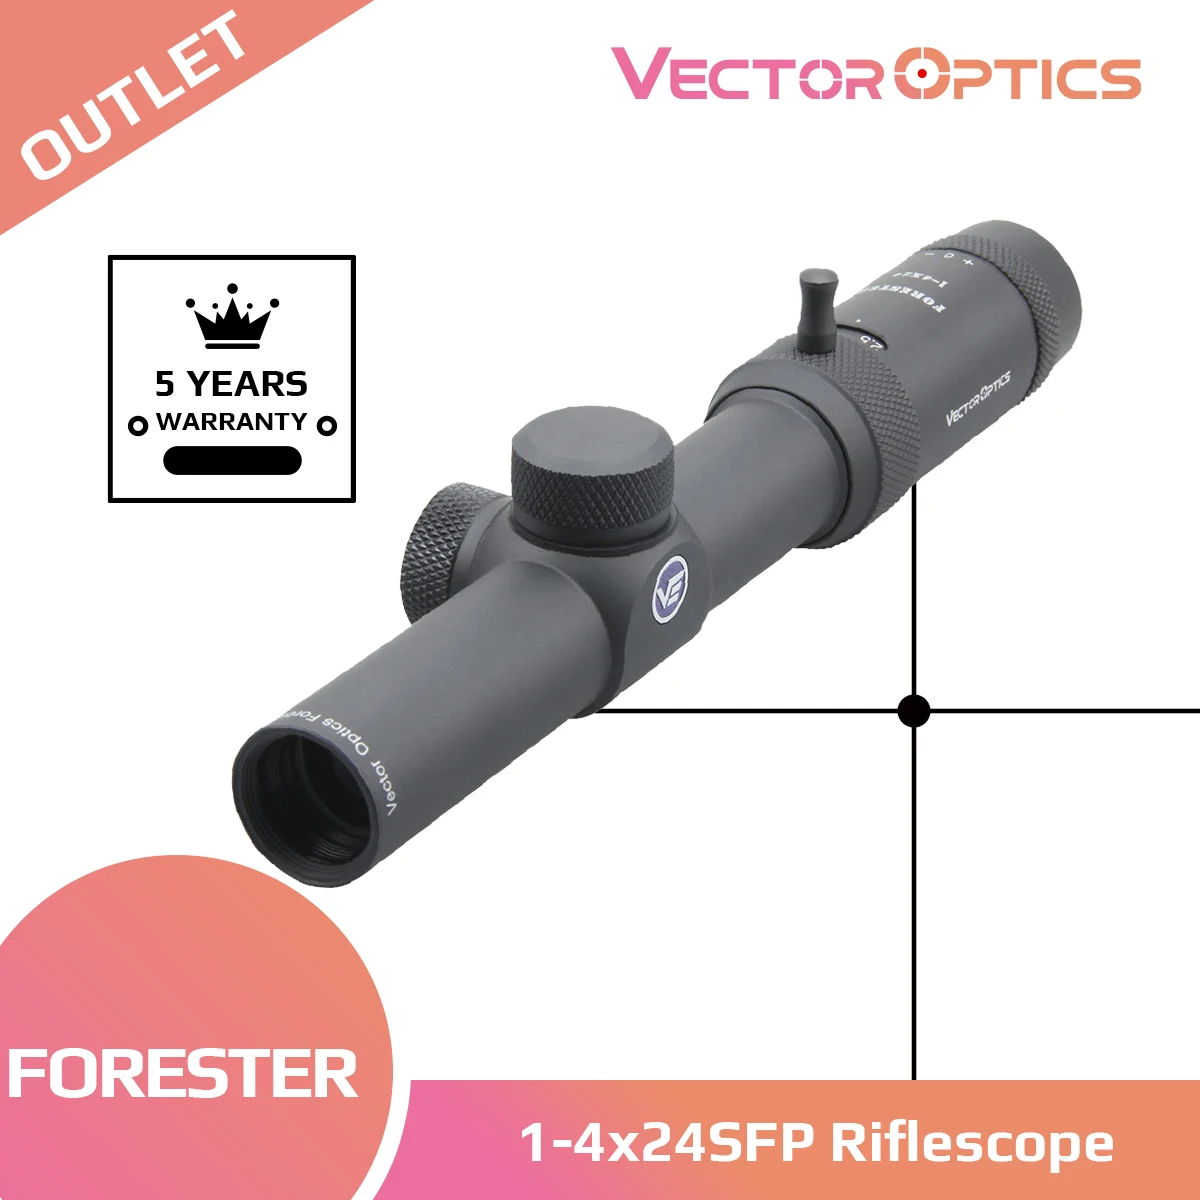 

Vector Optics Forester JR 1-4x24 Rifle Scope Edge to Edge Optical Hunting Riflescope 1/2 MOA Fits .223 5.56mm 7.62mm & Airsoft